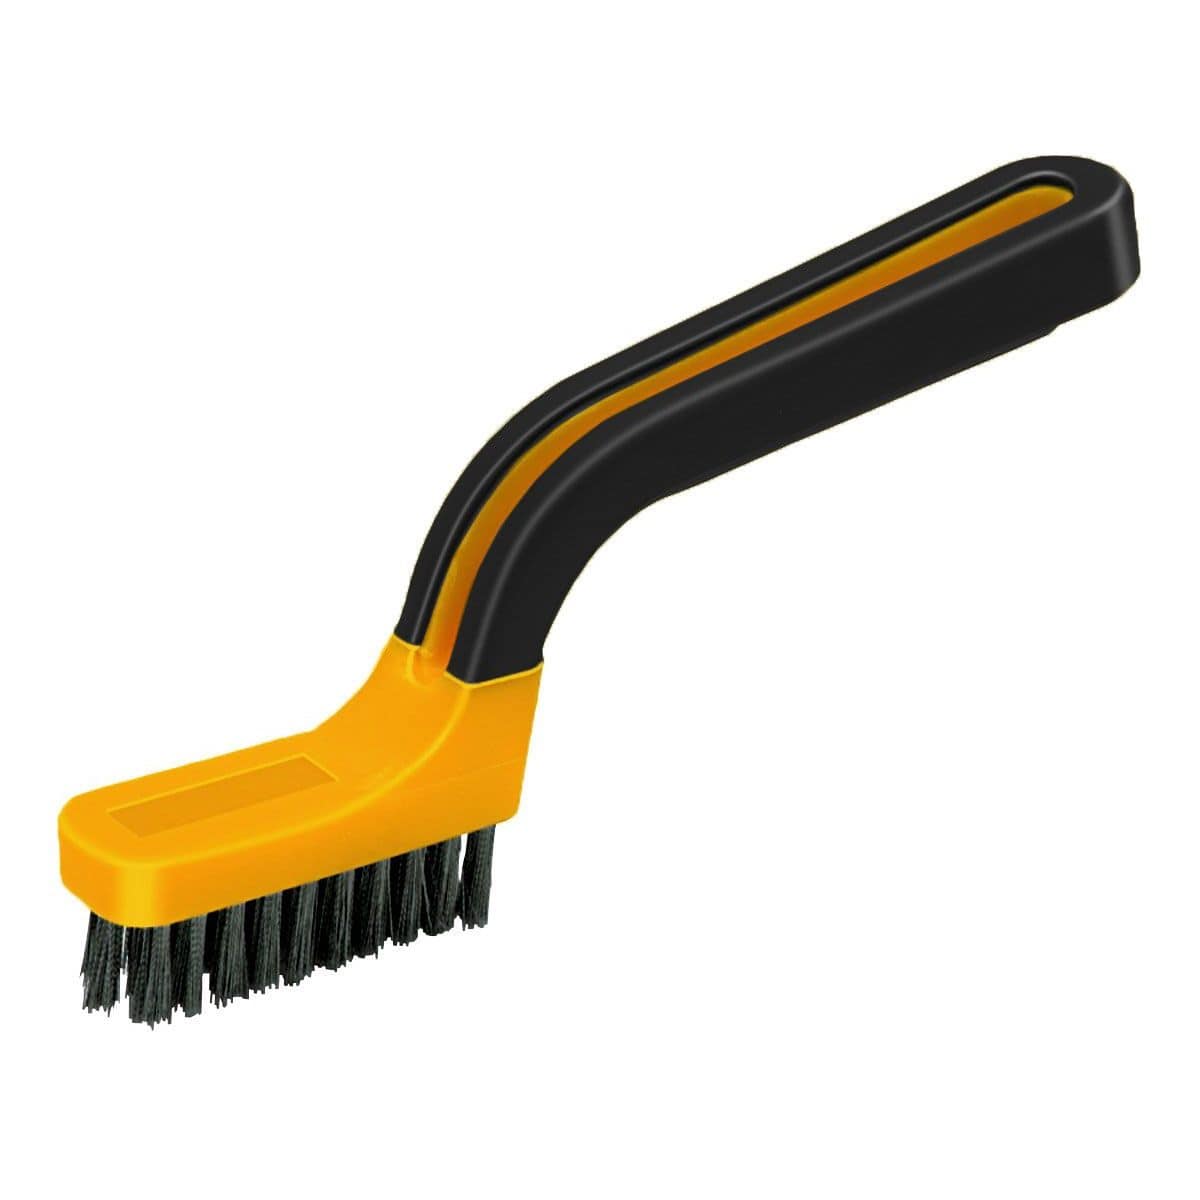 Grout Removal Tool, Caulking Removal Tool, Grout Cleaner, Scraper, Scrubber  Brus